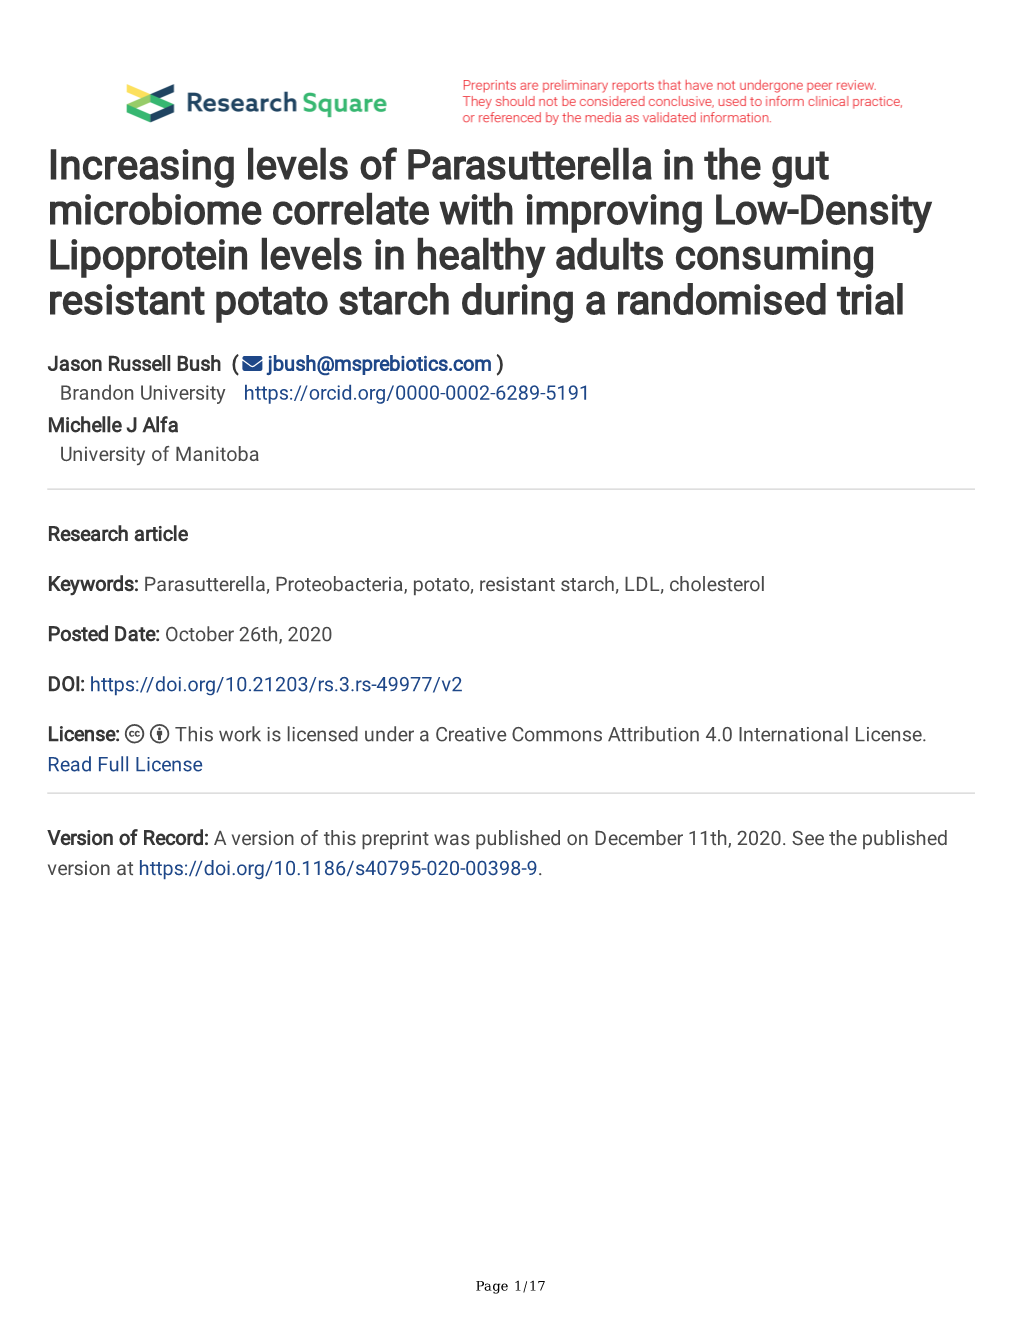 Increasing Levels of Parasutterella in the Gut Microbiome Correlate With